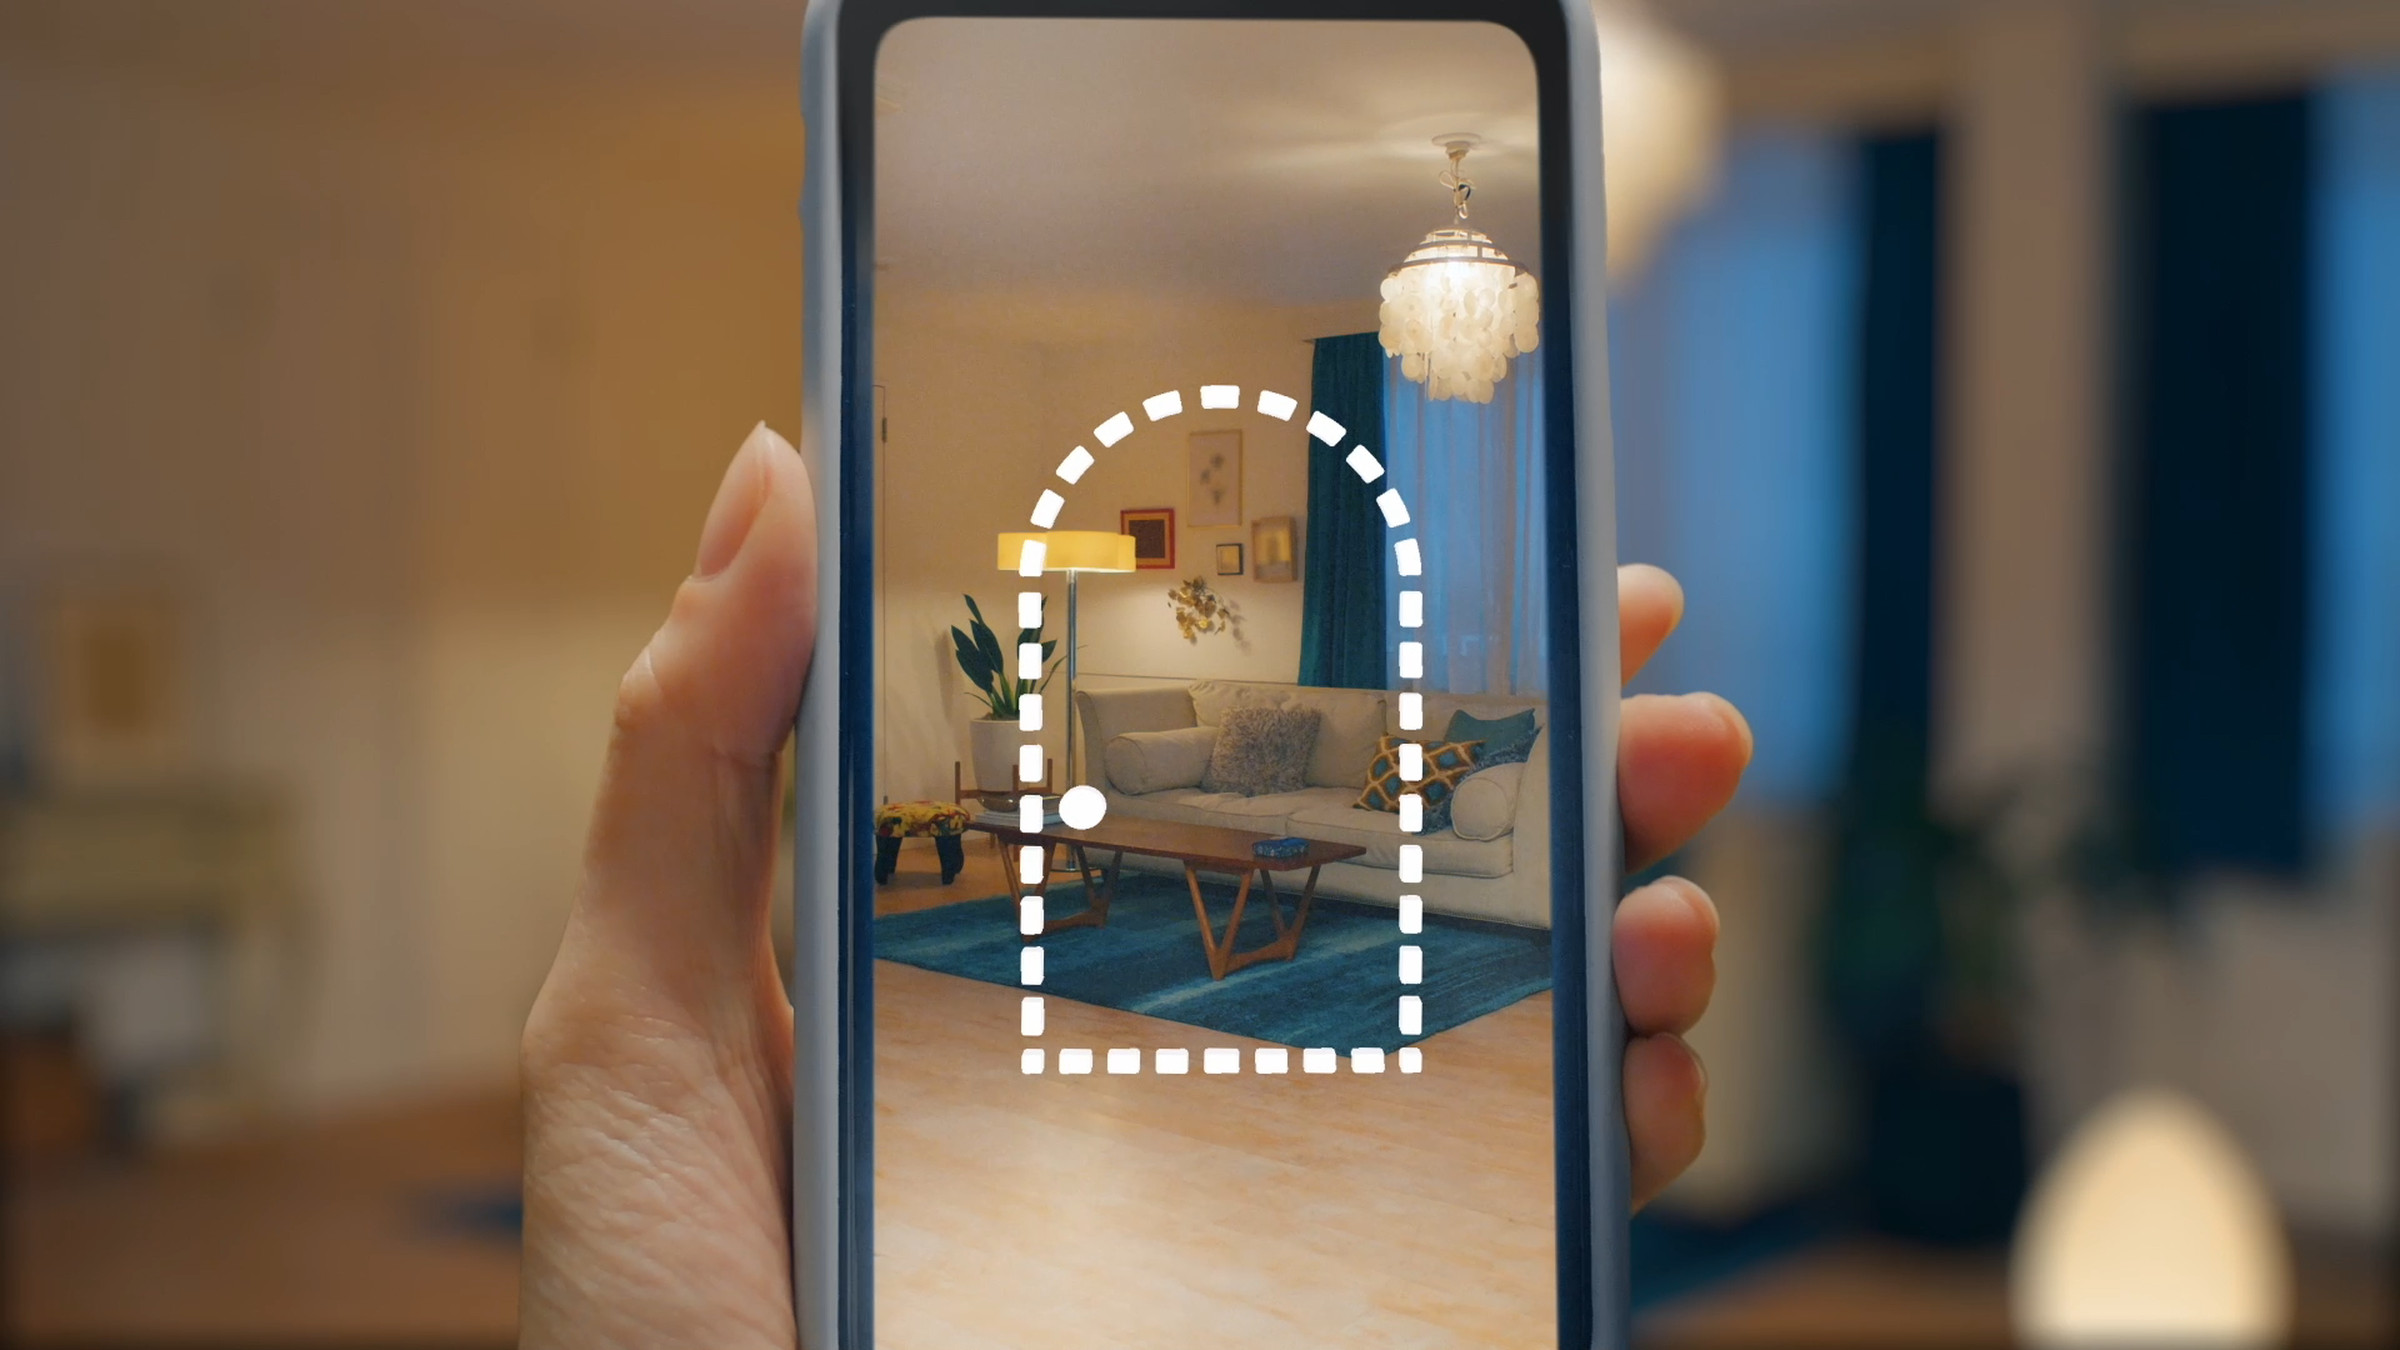 AR Cabin lets you assemble a virtual room and then explore it in augmented reality.